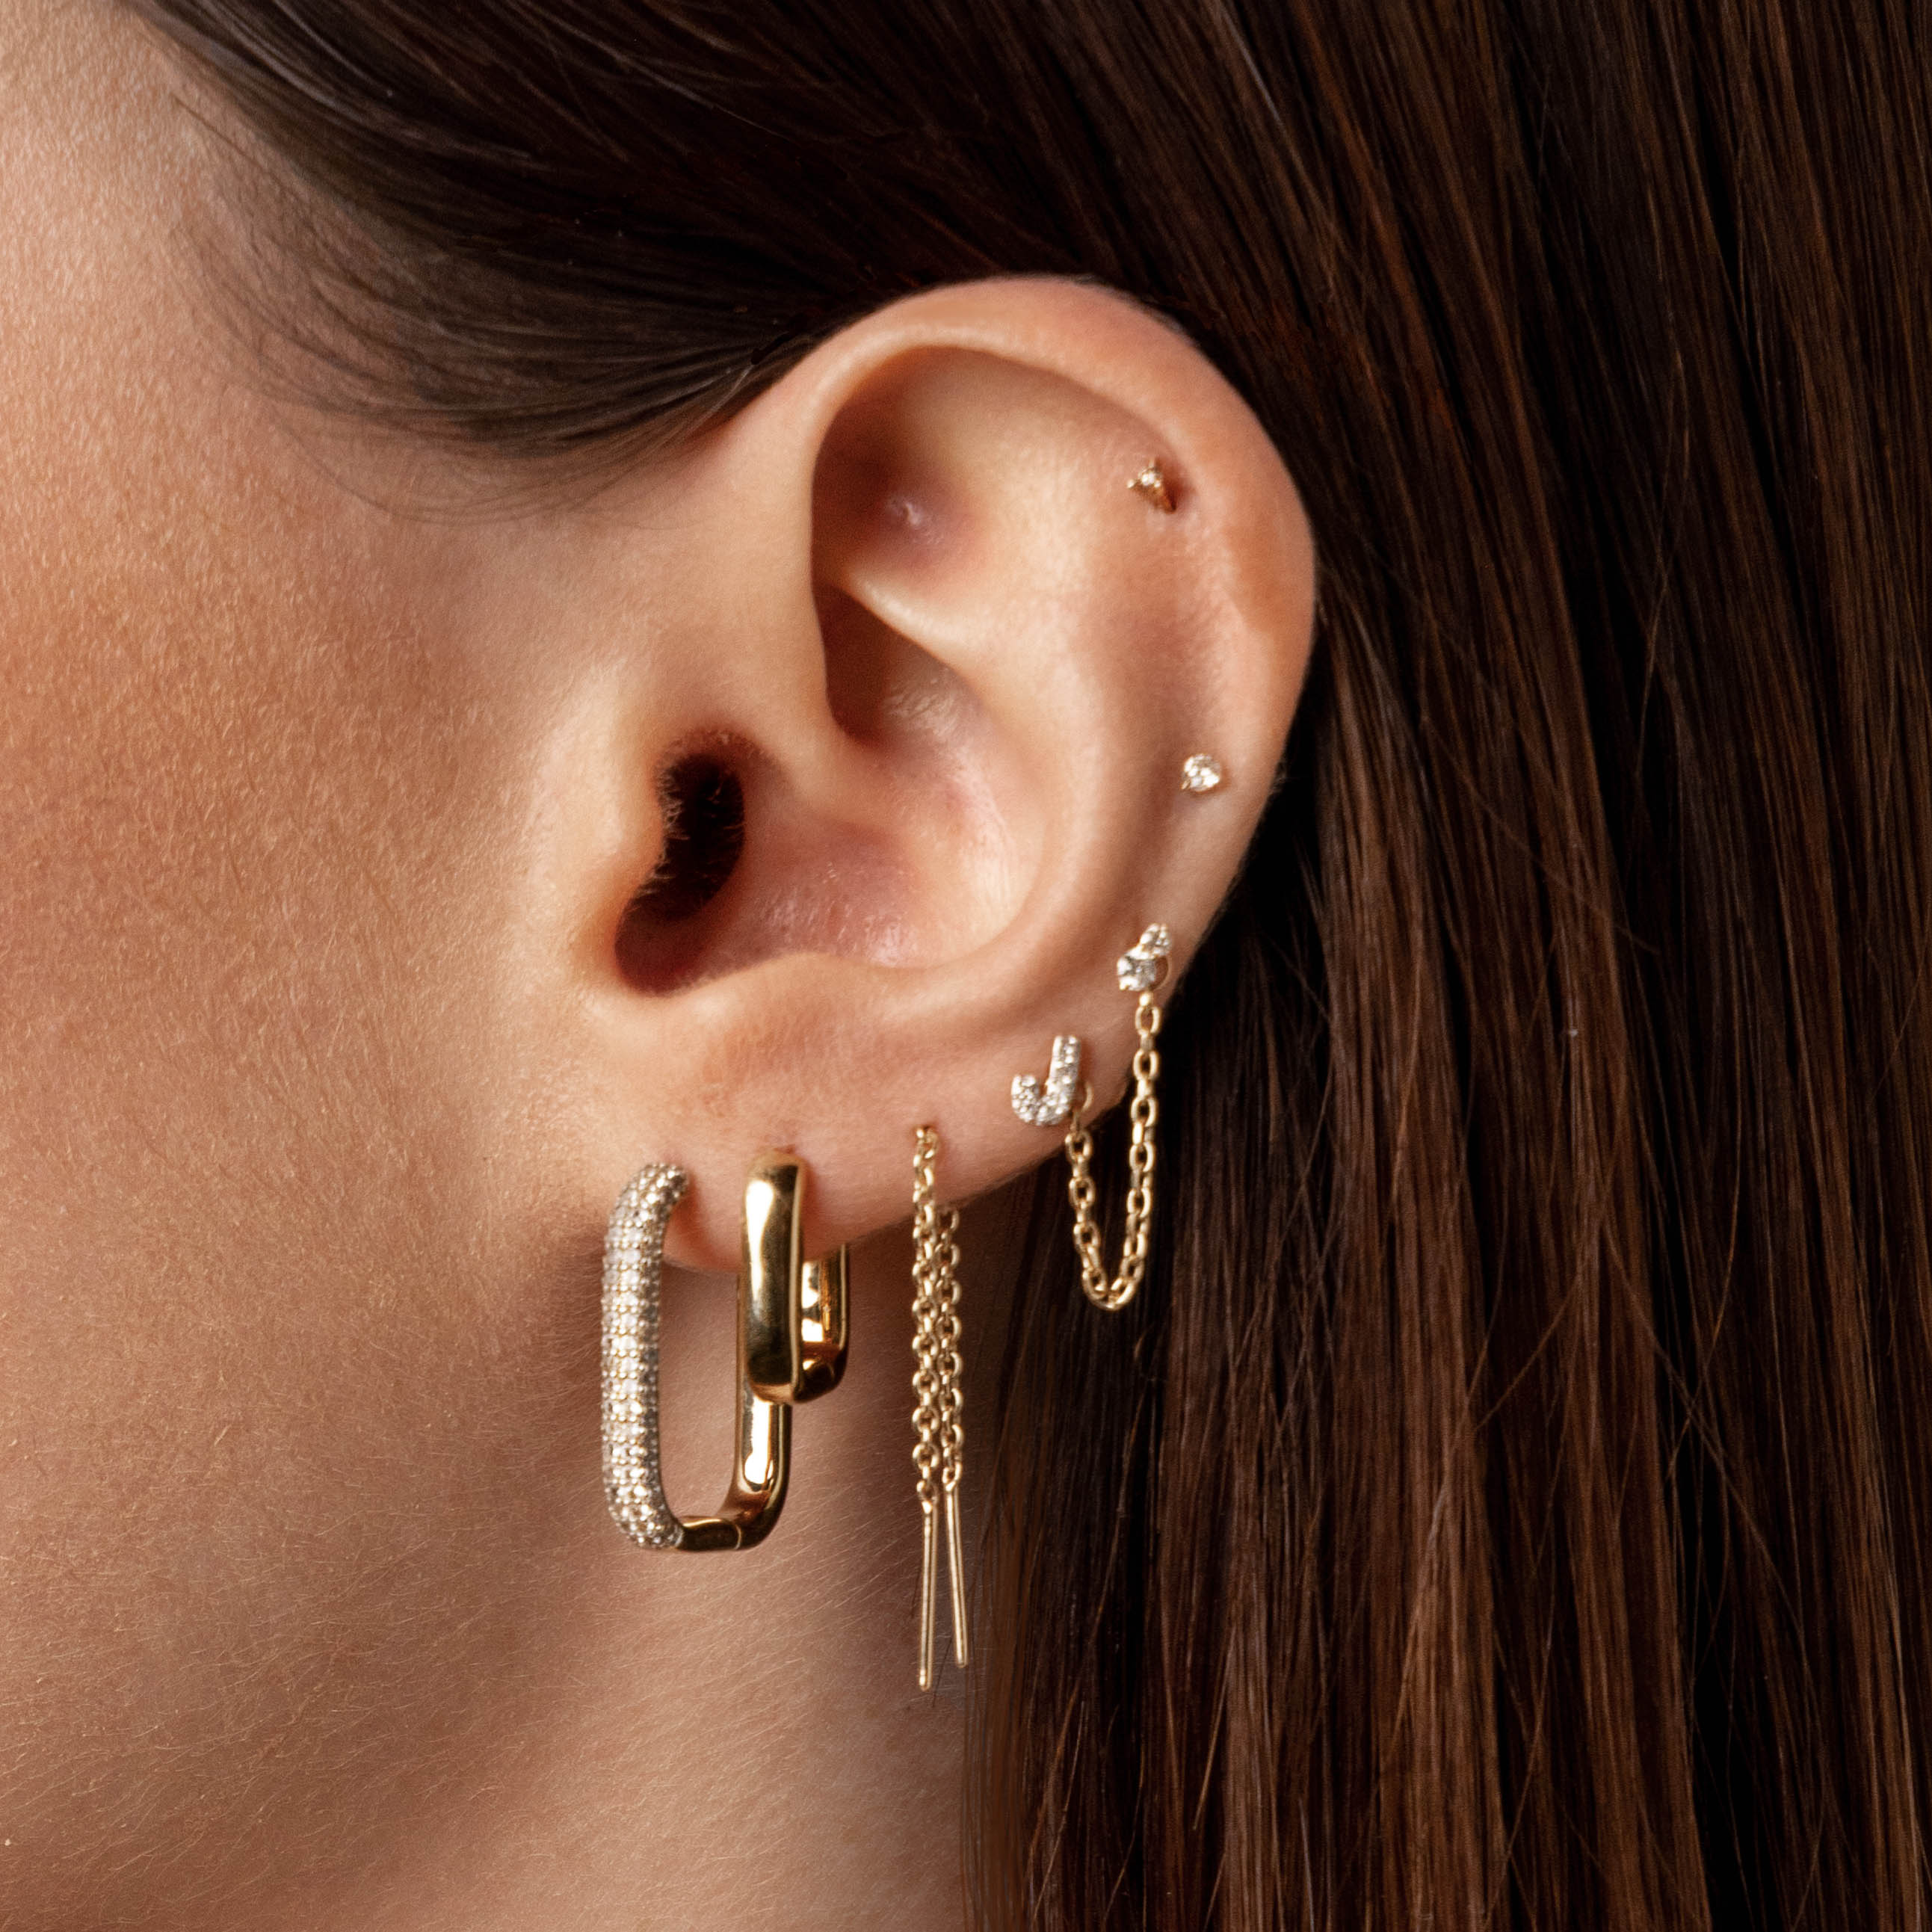 Curated Ear Piercing Ideas  Pretty Ways To Stack Your Ear Piercings